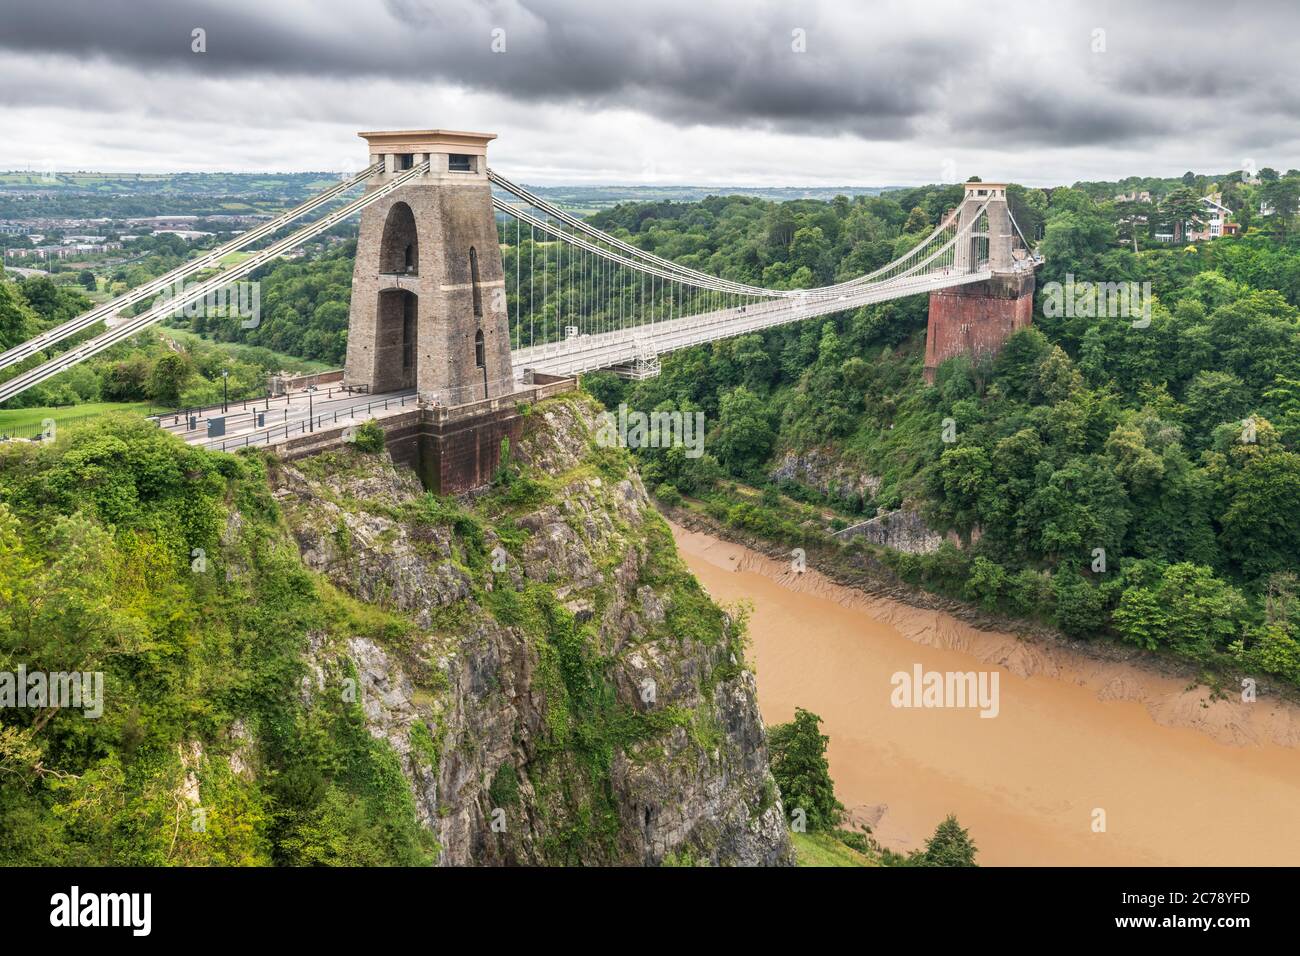 The Clifton Suspension Bridge is a suspension bridge spanning the Avon Gorge and the River Avon, linking Clifton in Bristol to Leigh Woods in North So Stock Photo